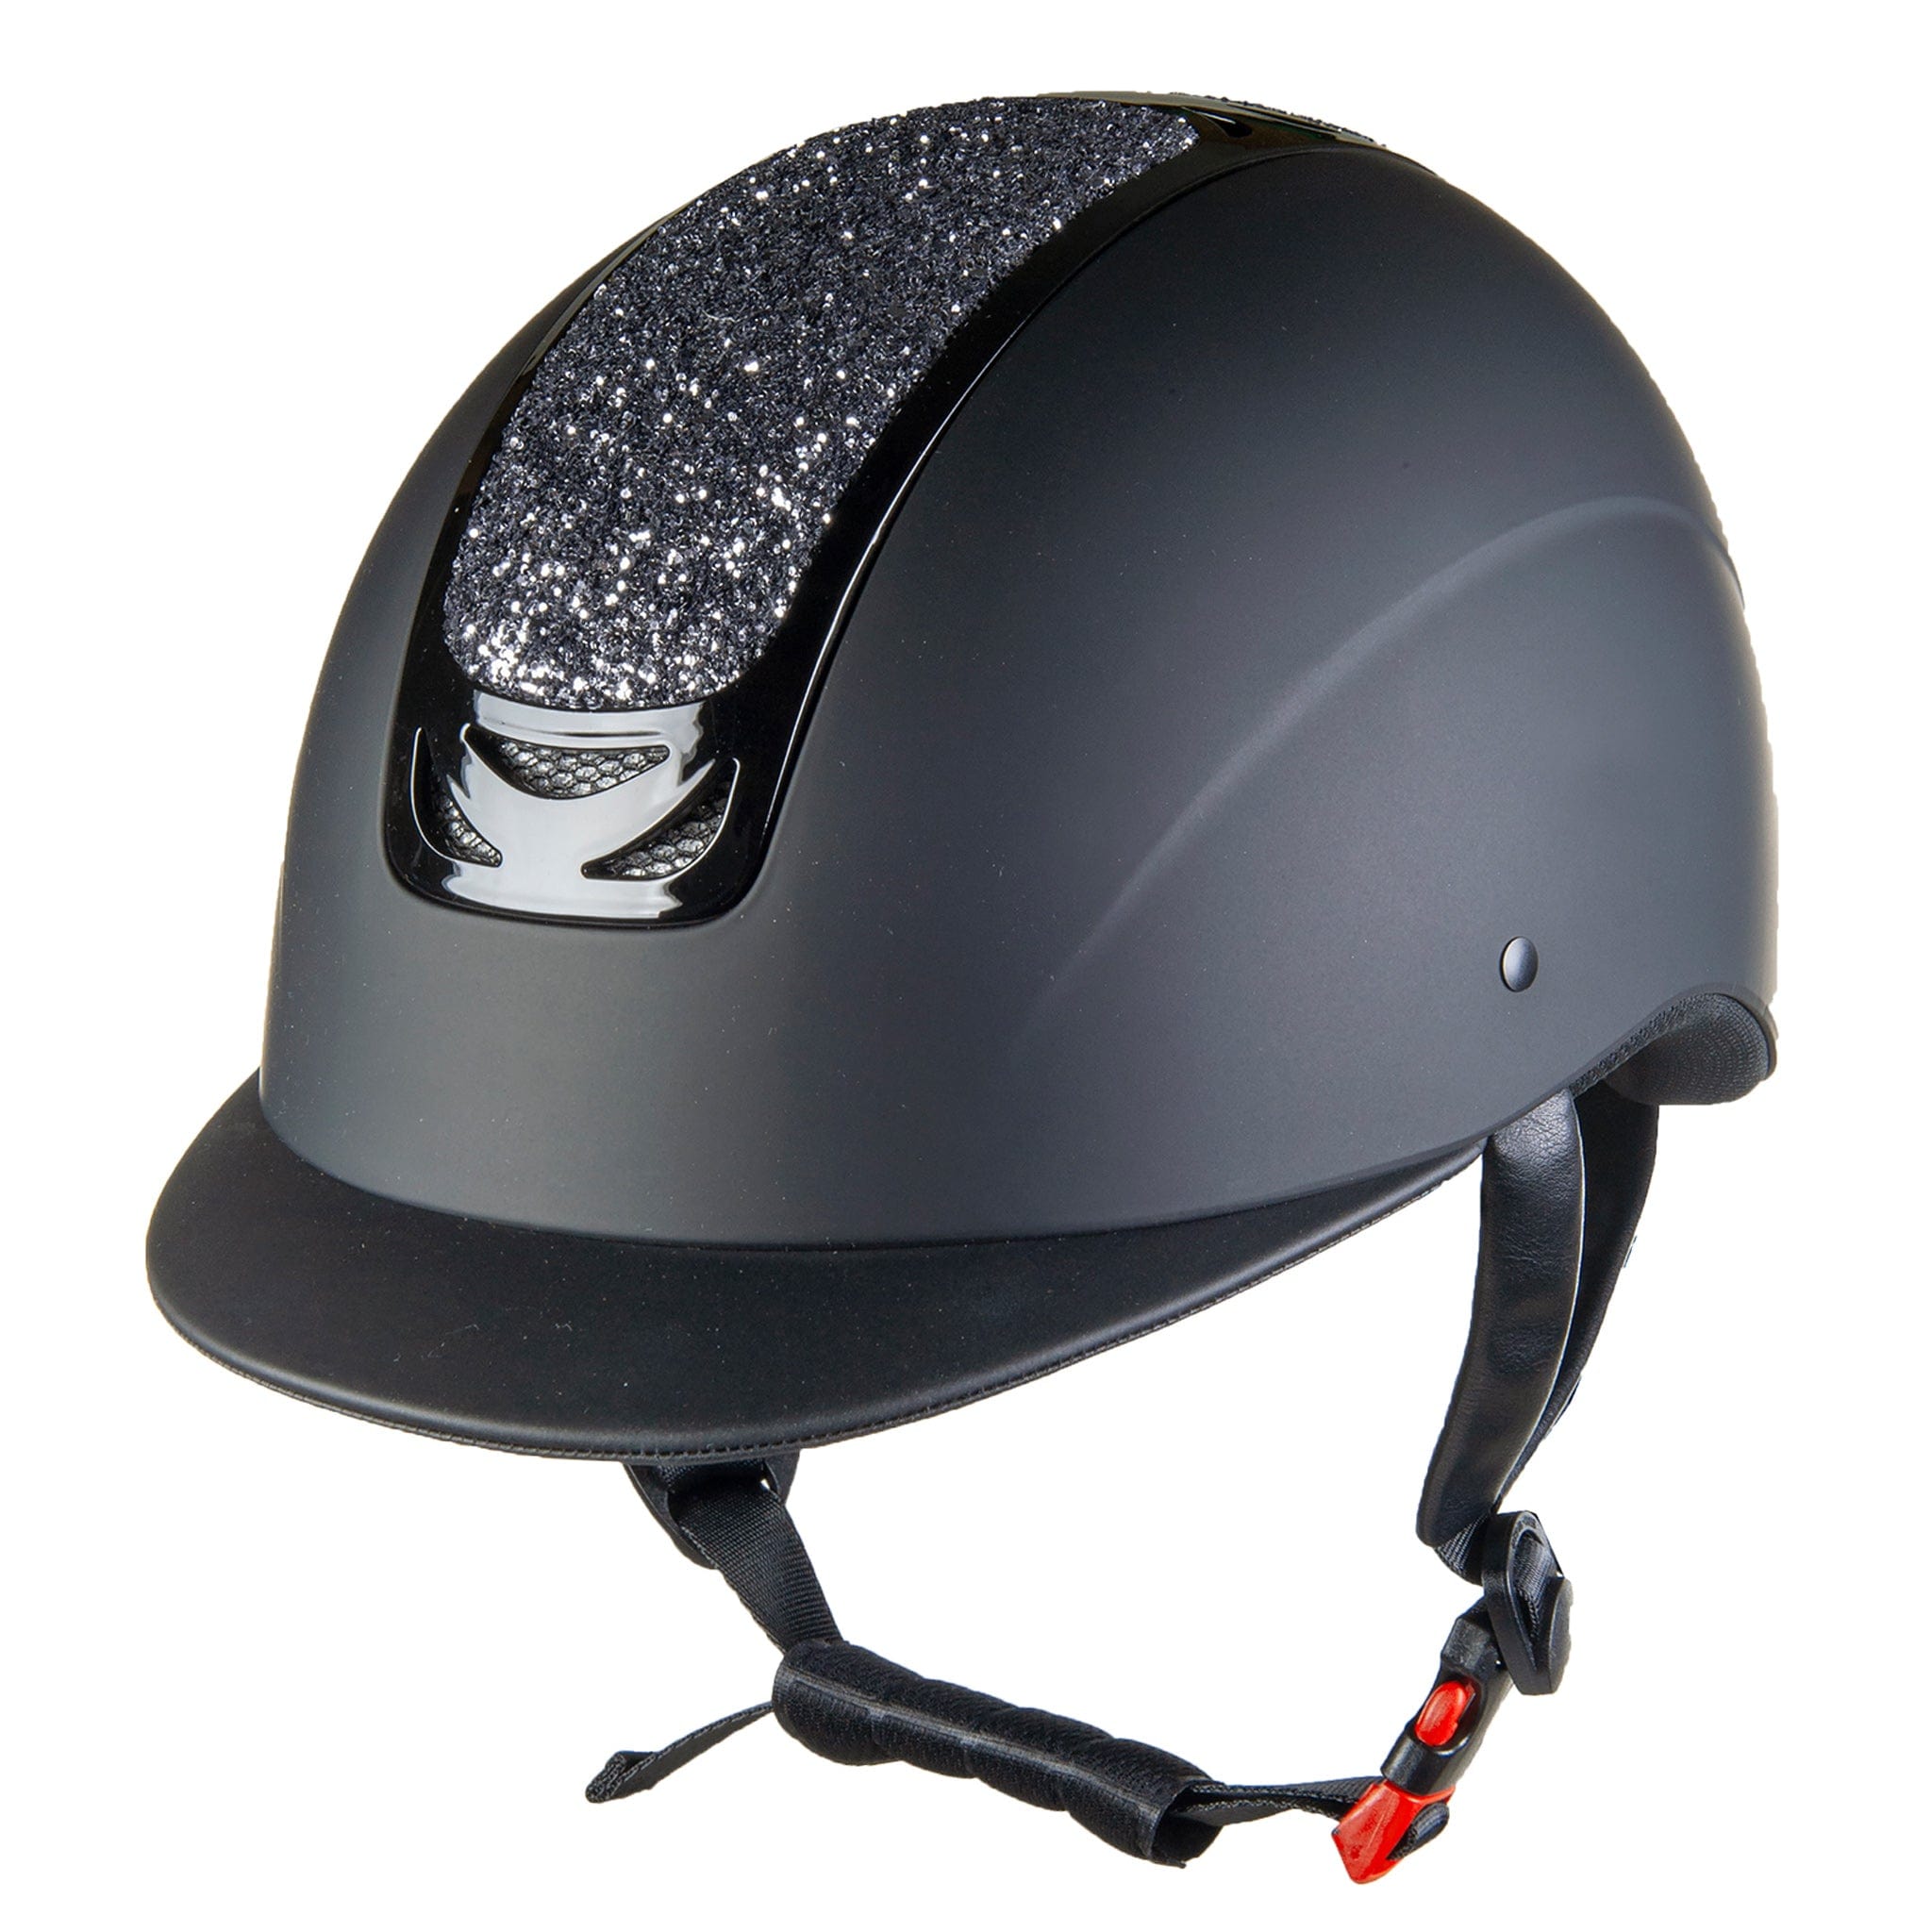 HKM Glamour Riding Hat 11800 Black and Silver Sparkle